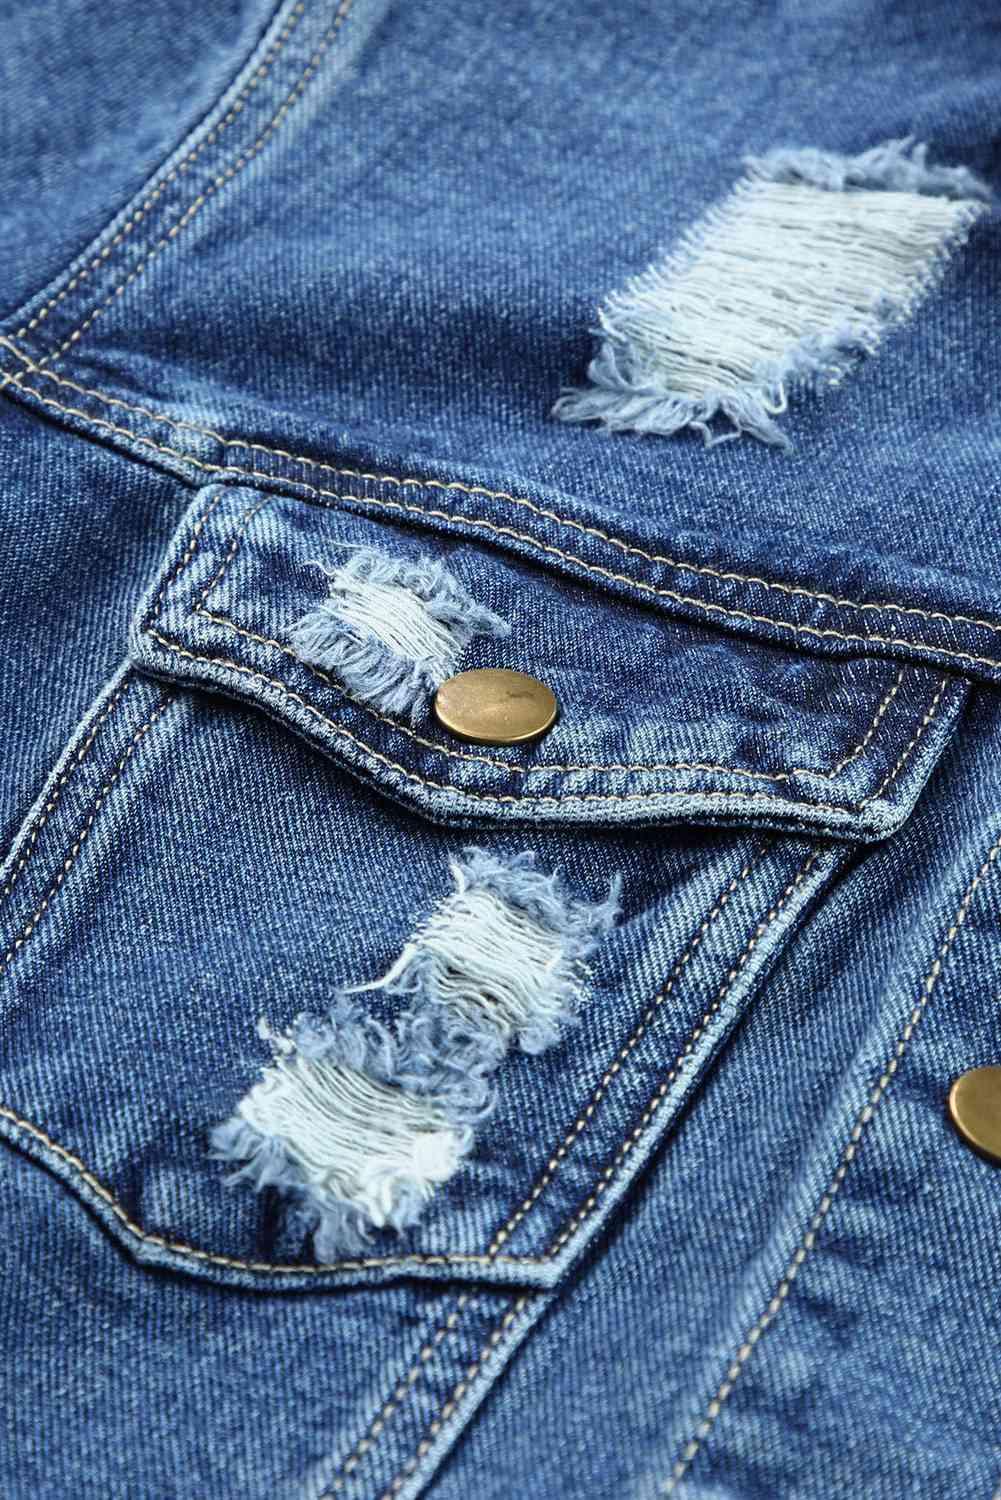 a close up of a pair of ripped jeans